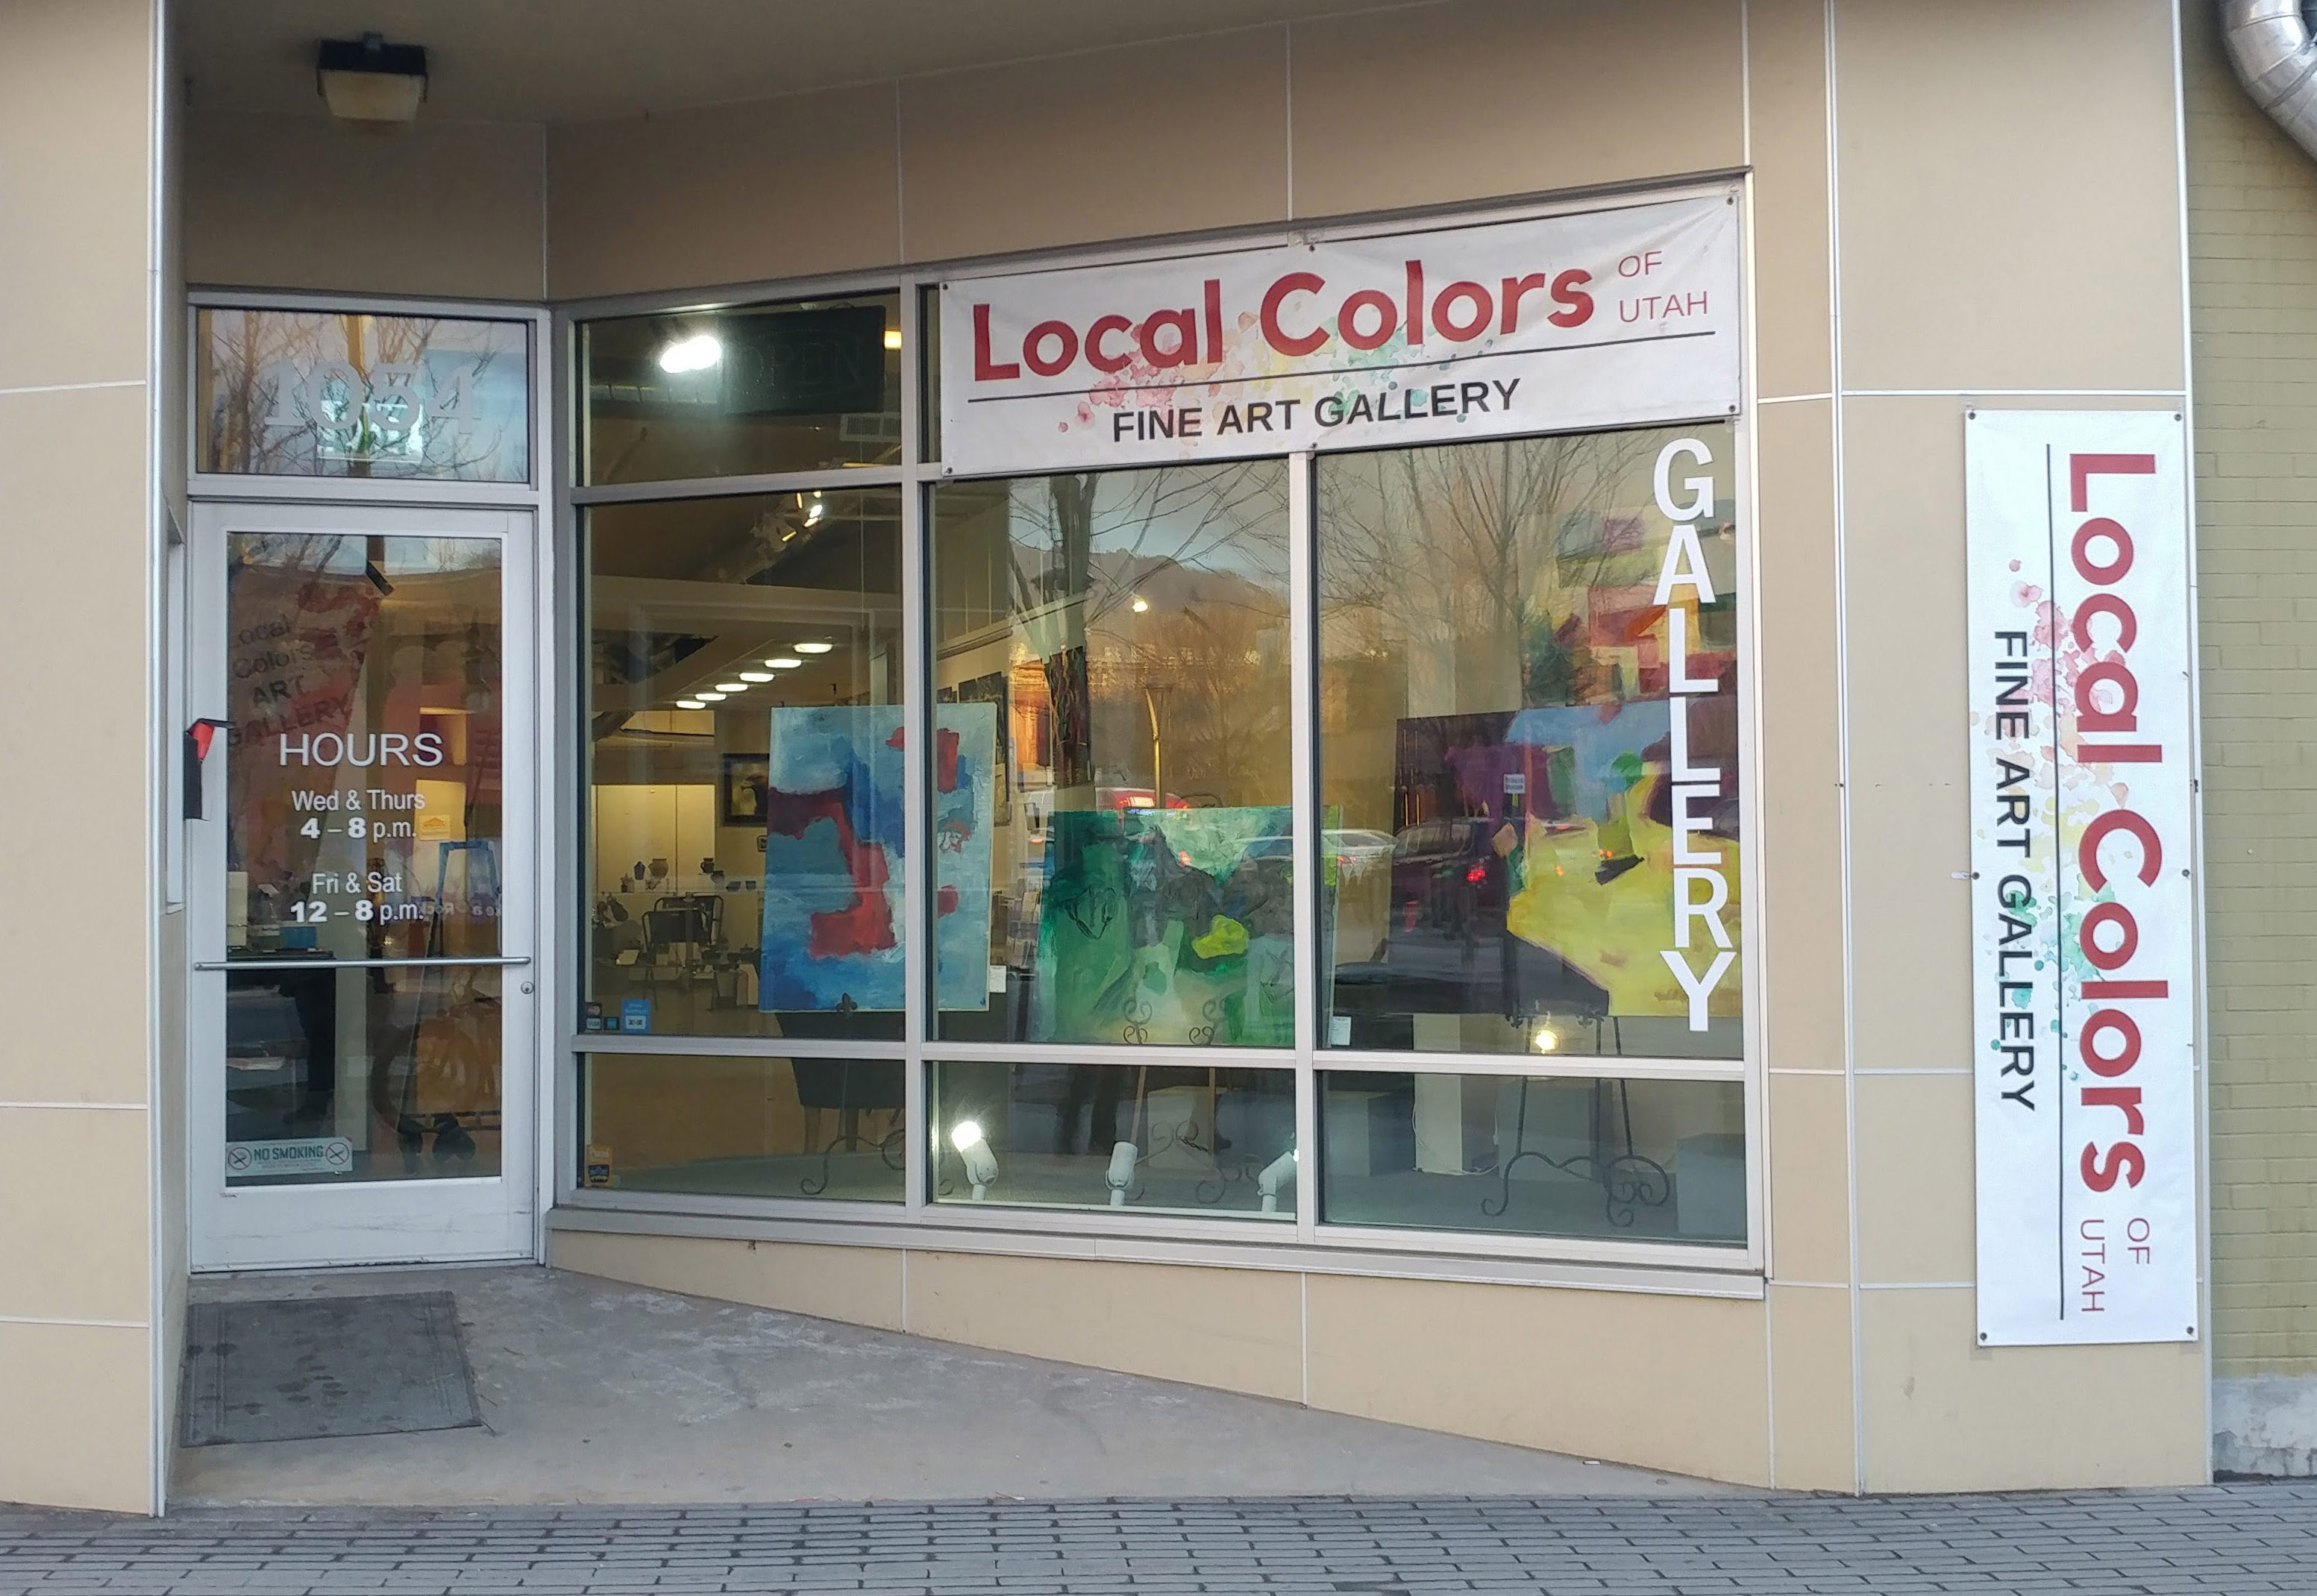 The Local Colors storefront in March 2021.